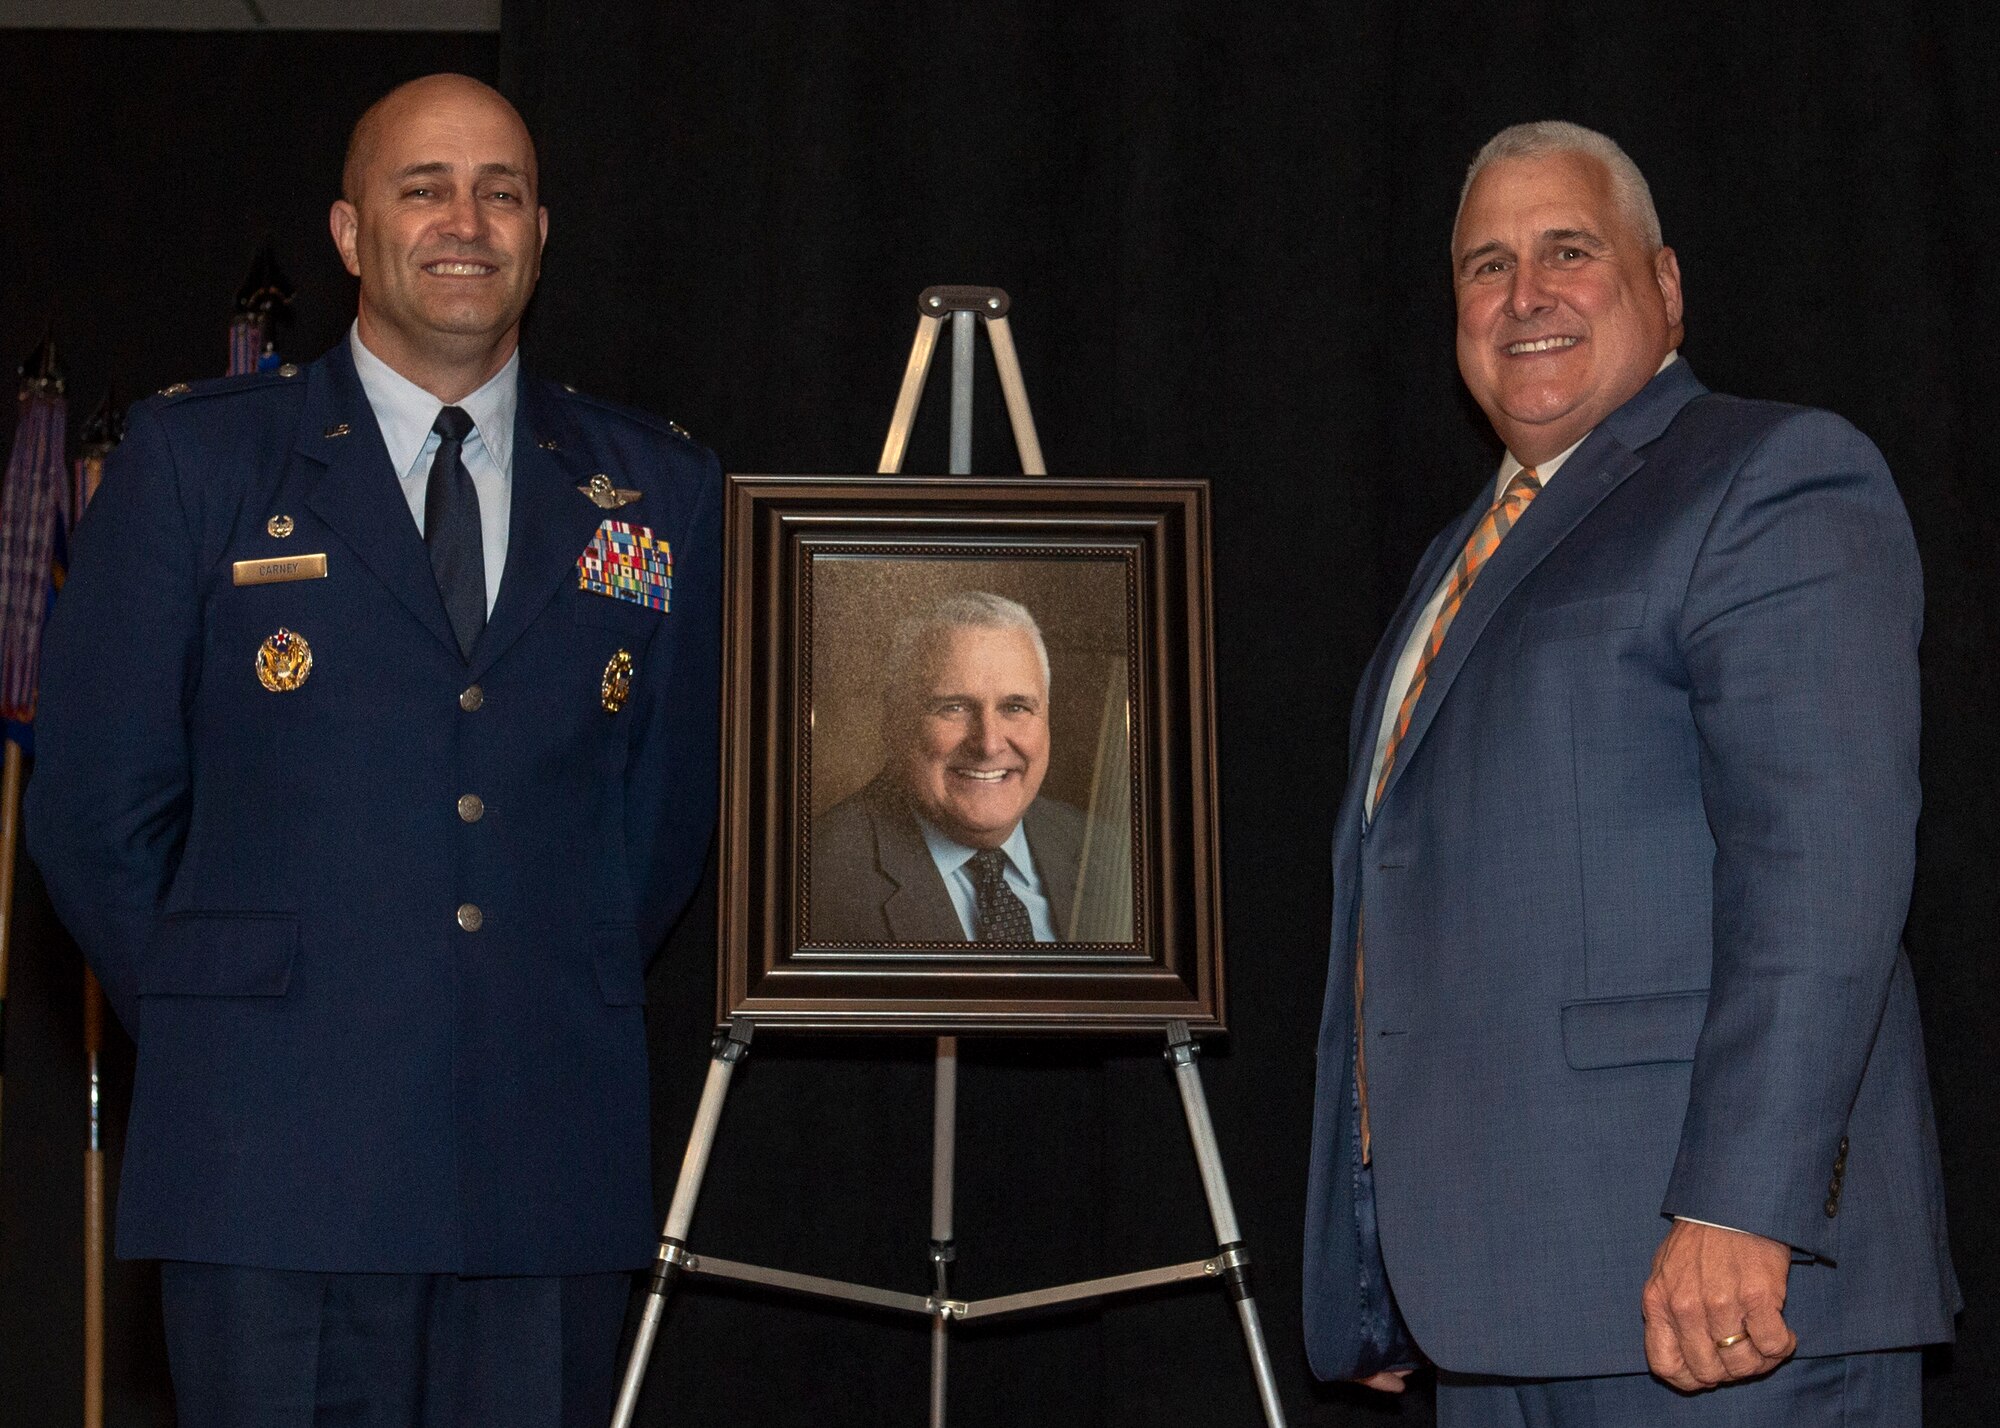 U.S. Air Force Col. Eric Carney, 97th Air Mobility Wing commander, and the Honorable Mike Schulz, former United States Senator for the state of Oklahoma, stand by his portrait during the Friends of Altus Induction ceremony, March 29, 2019, at Altus Air Force Base, Okla. Schulz aided the wing in solving a wind farm crisis that could have affected the training mission of the 97th AMW. (Senior Airman Jackson N. Haddon)